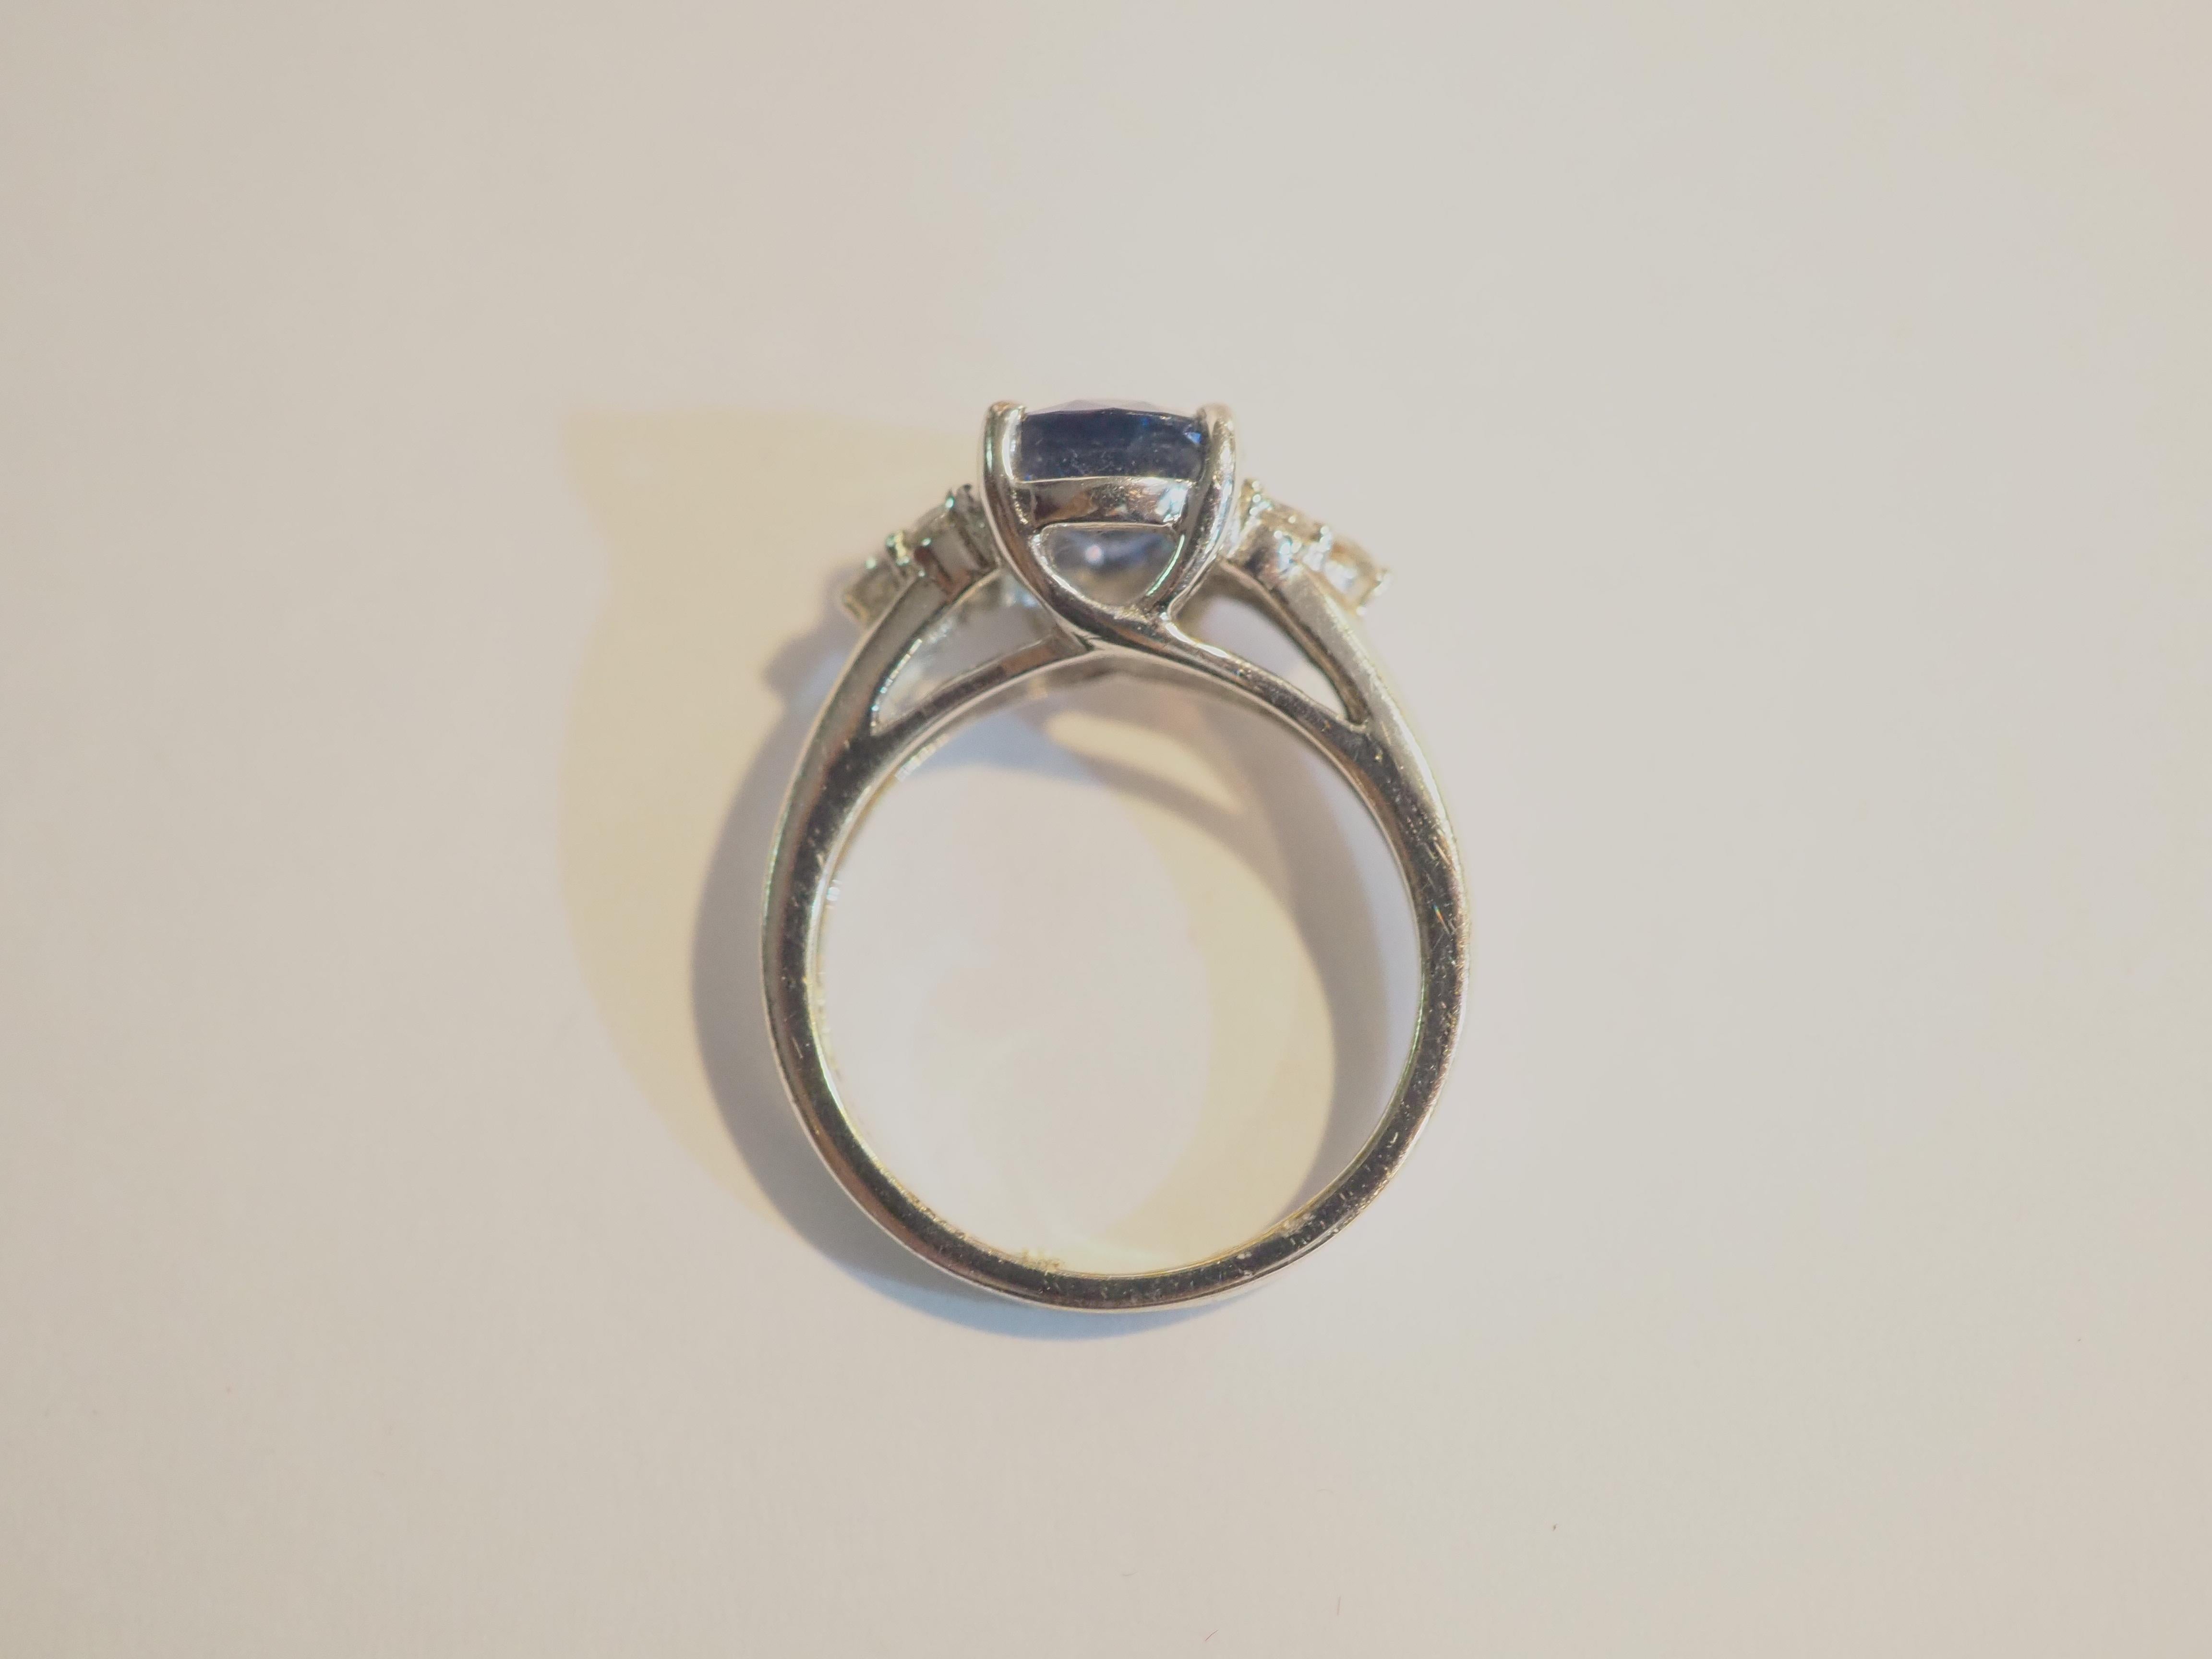 18k White Gold 1.87ct Blue Sapphire & 0.30ct Diamond Engagement Ring In Excellent Condition For Sale In เกาะสมุย, TH